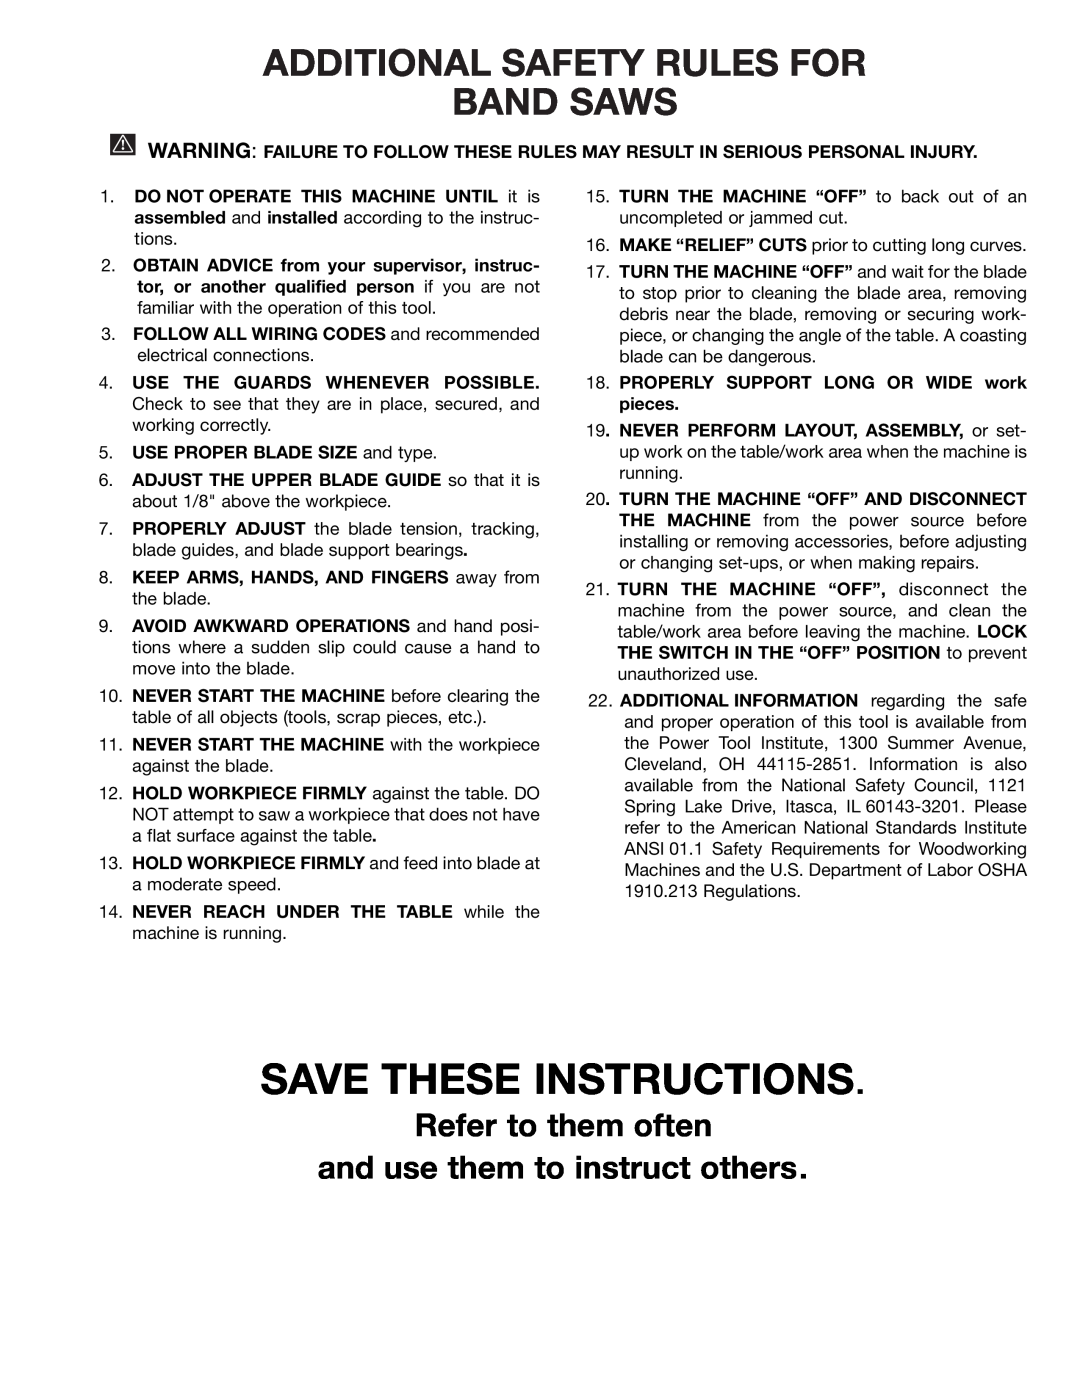 Delta 28-241, 28-299A instruction manual Save These Instructions, Additional Safety Rules For Band Saws 